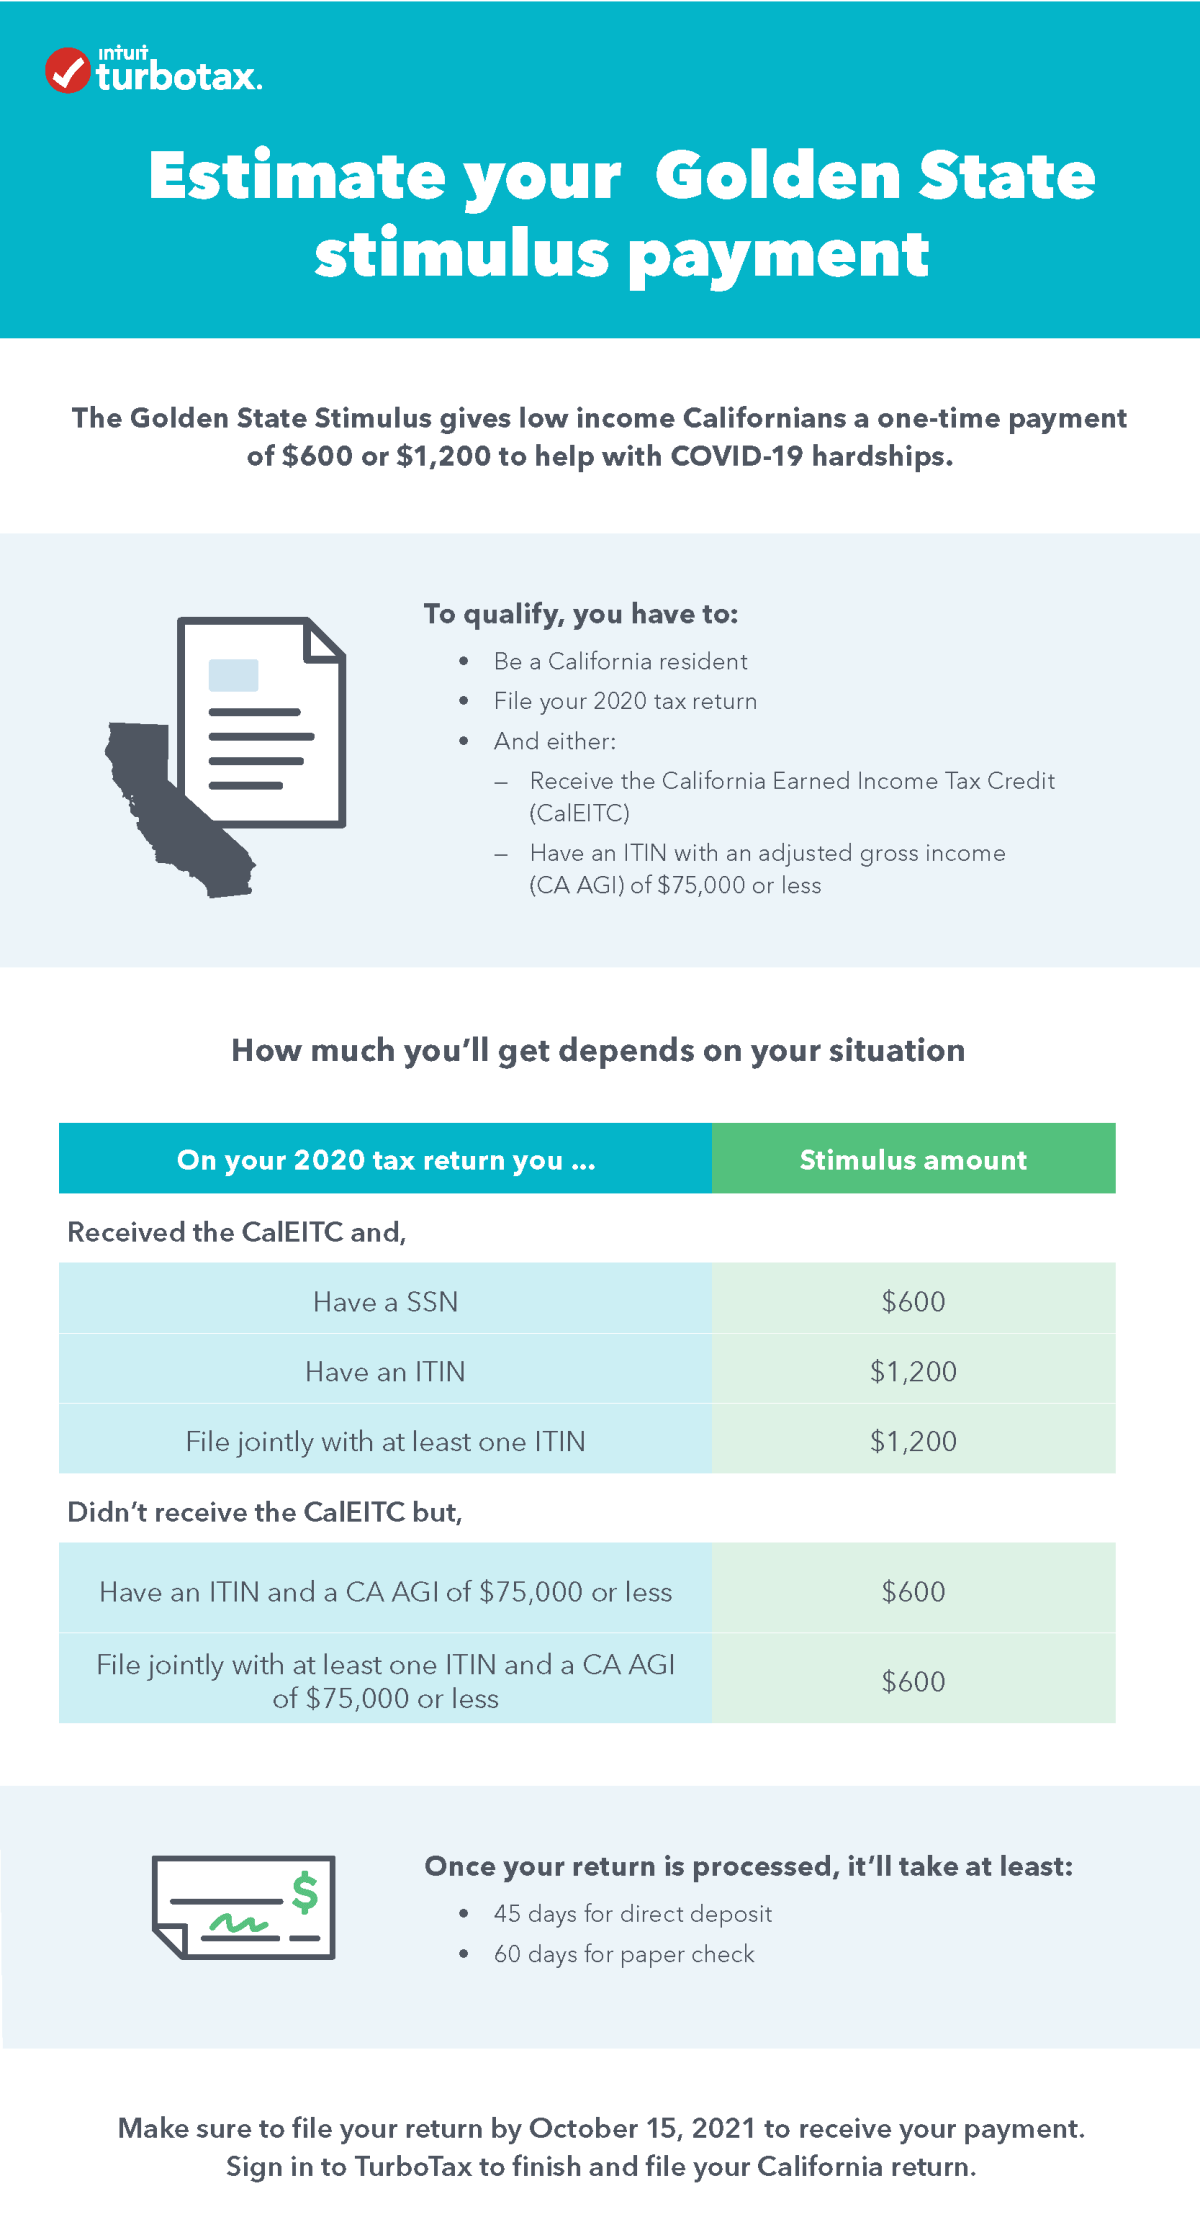 Guide to the California Golden State Stimulus